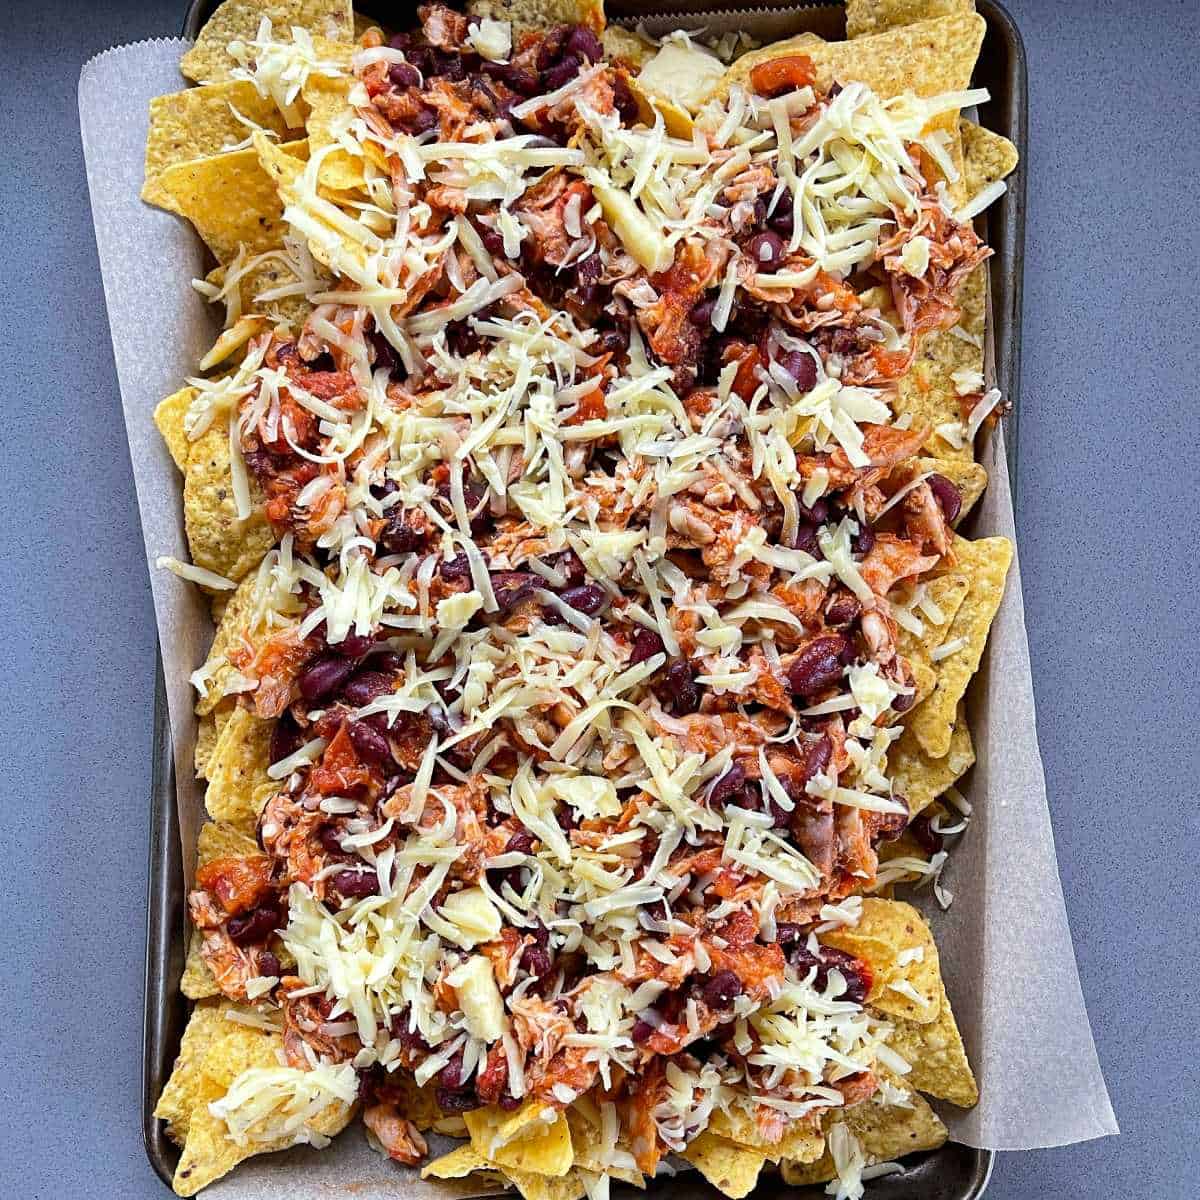 Cheesy chicken nachos assembled on a baking tray with grated cheese on top, ready to go into the oven on grill